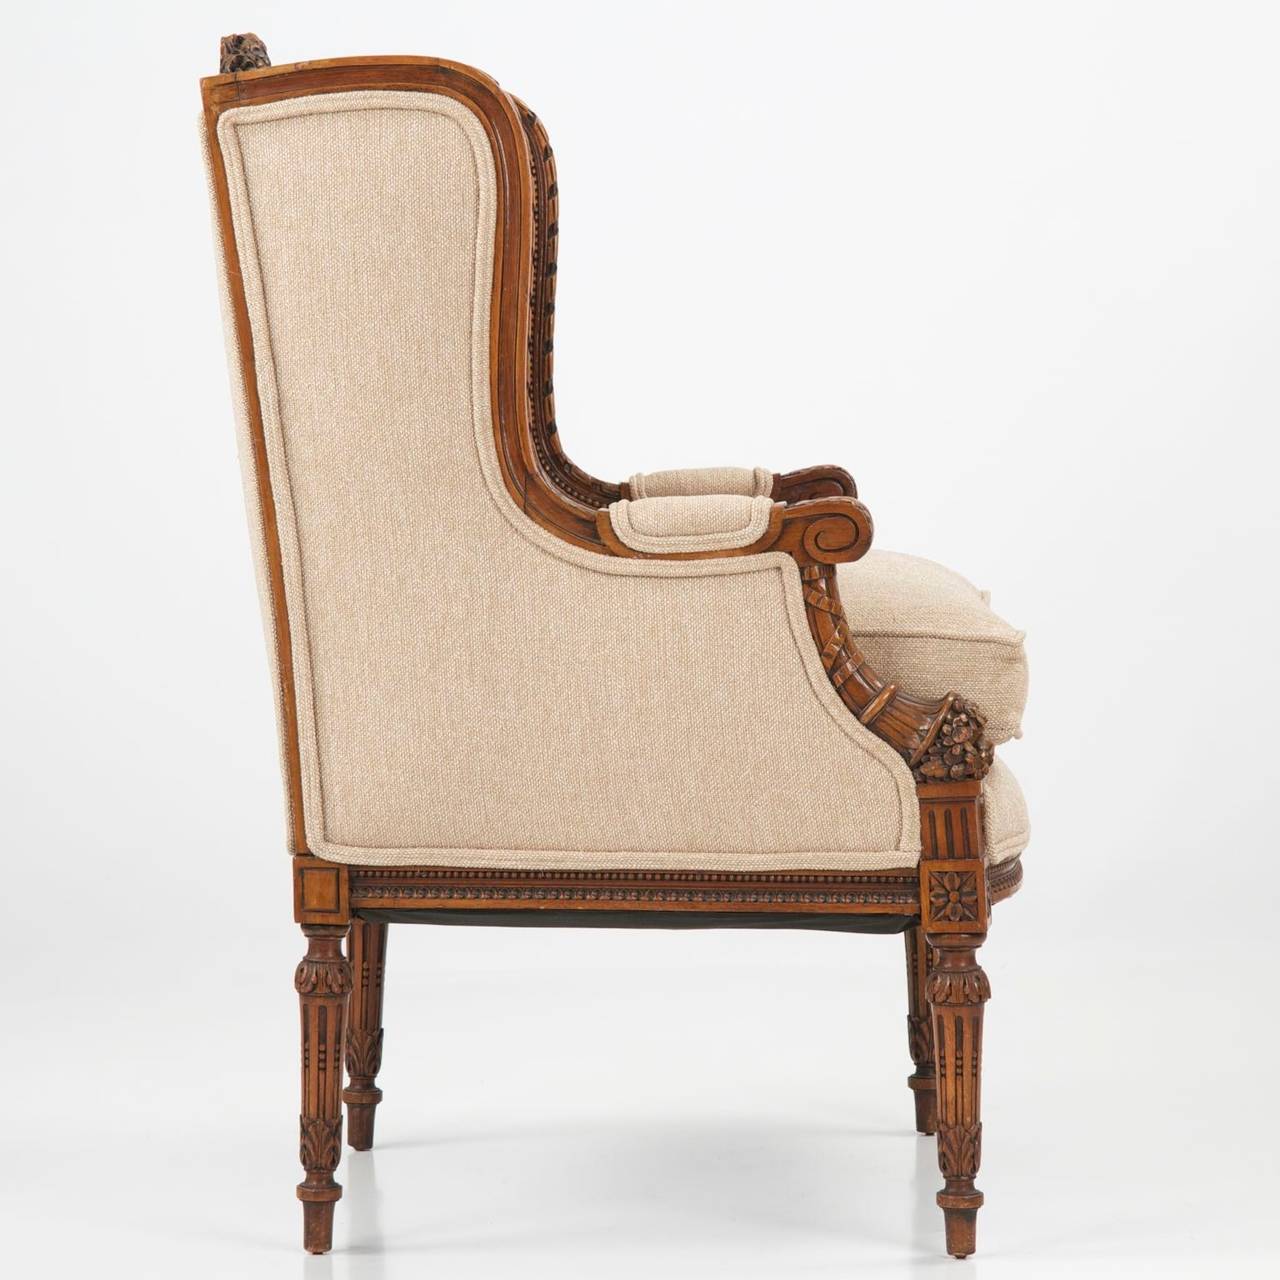 Louis XVI French Carved Mahogany Antique Wingback Armchair, 19th Century